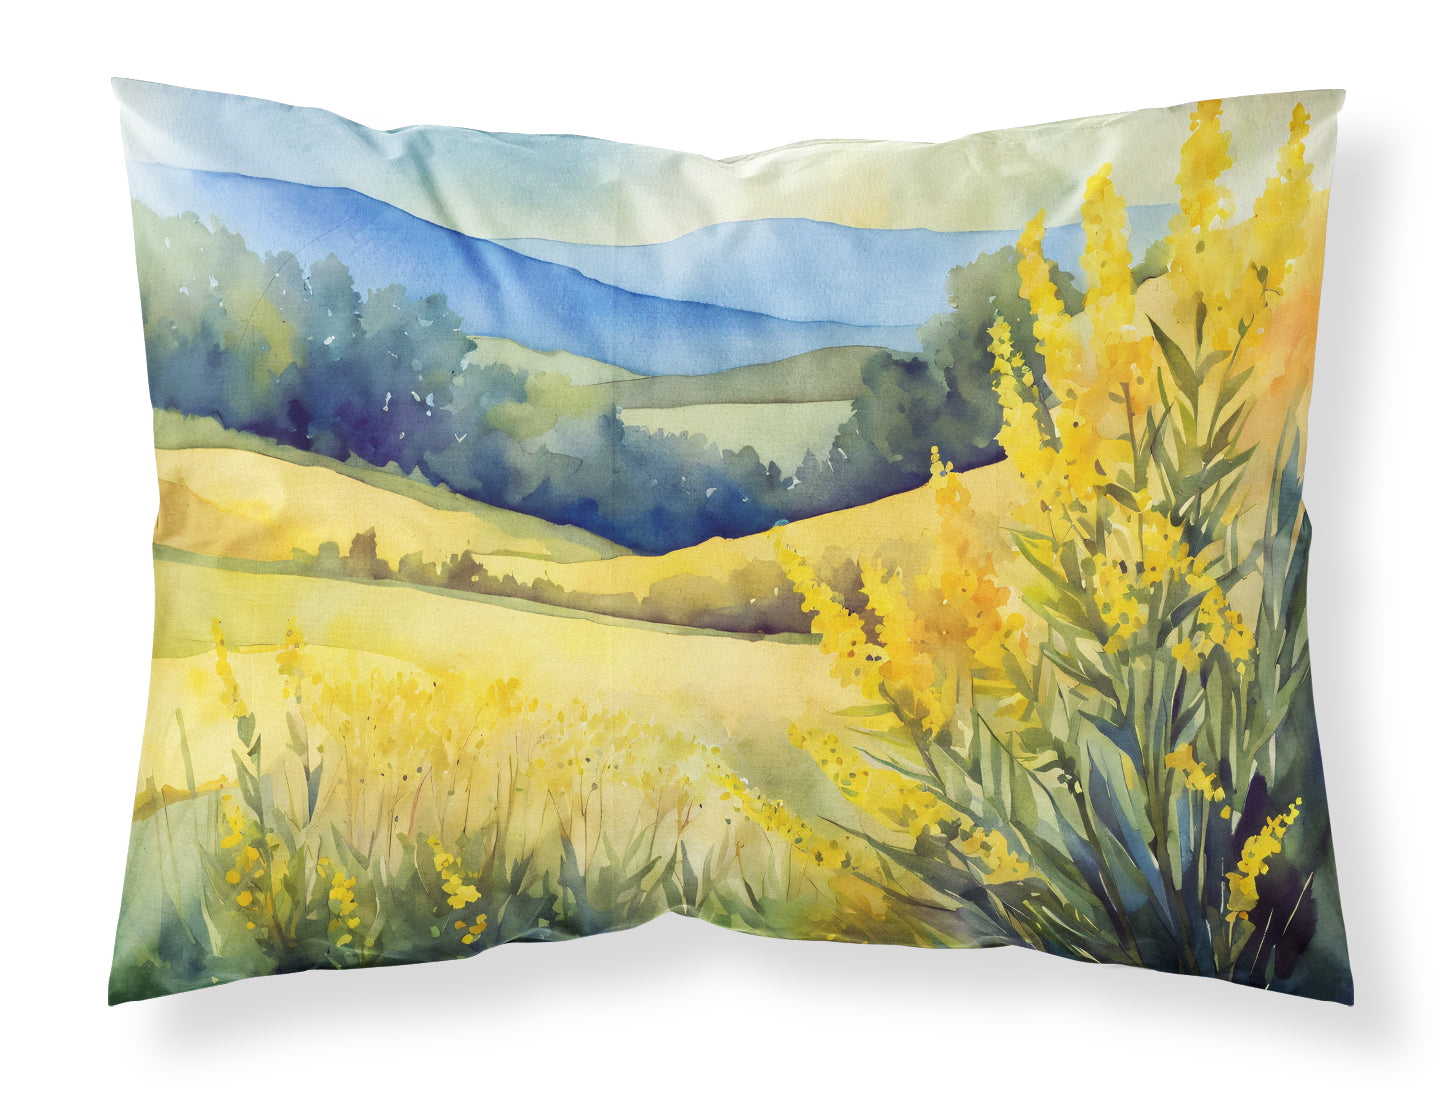 Buy this Kentucky Goldenrod in Watercolor Fabric Standard Pillowcase